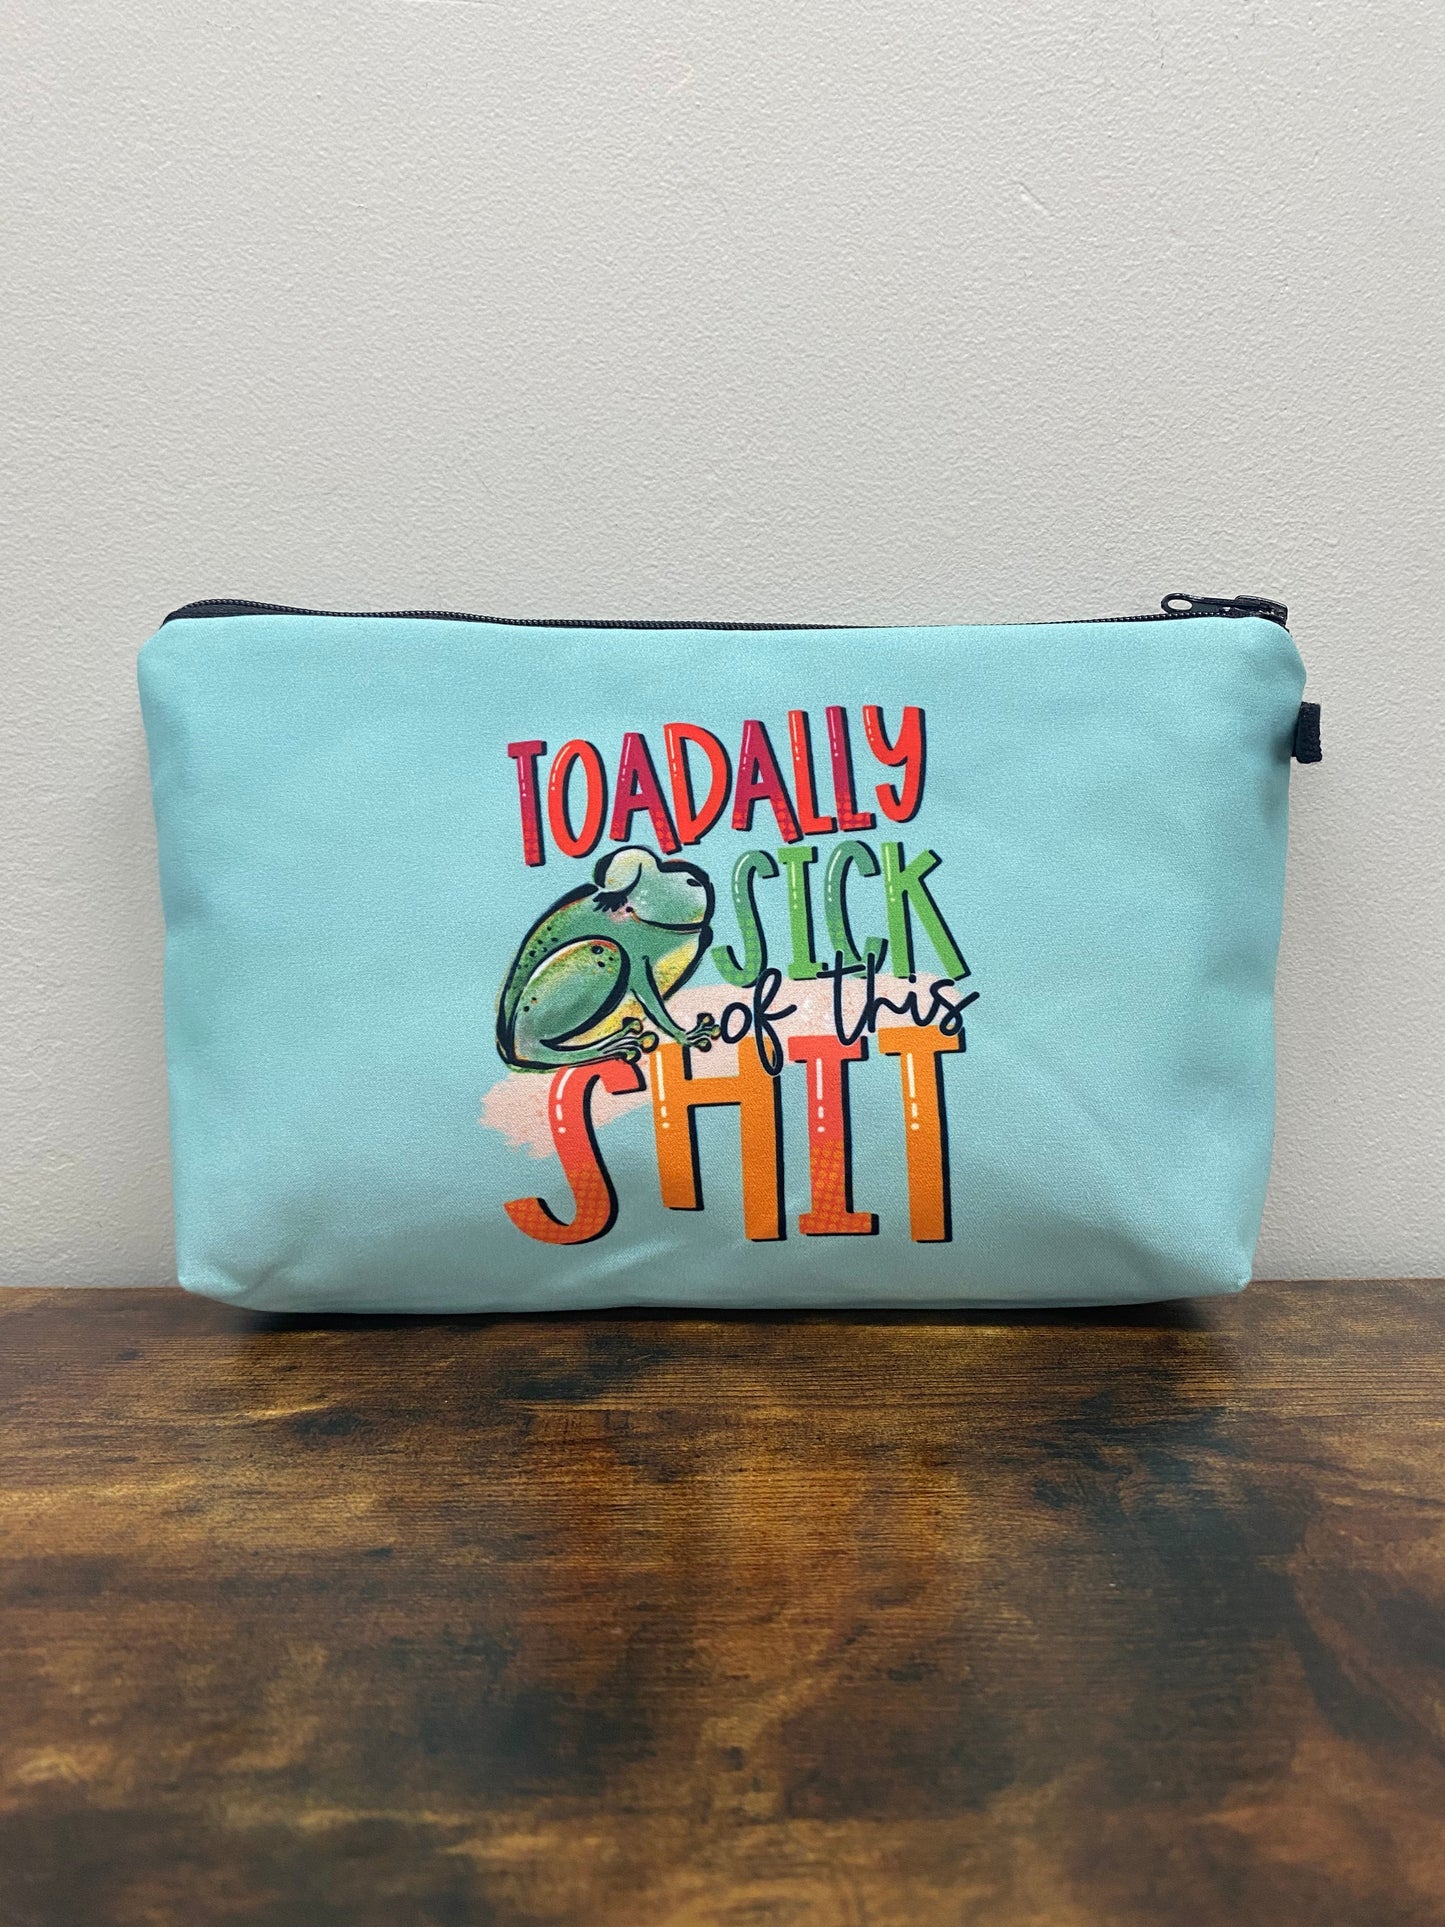 Toadally Sick Of This Shit  - Water-Resistant Multi-Use Pouch